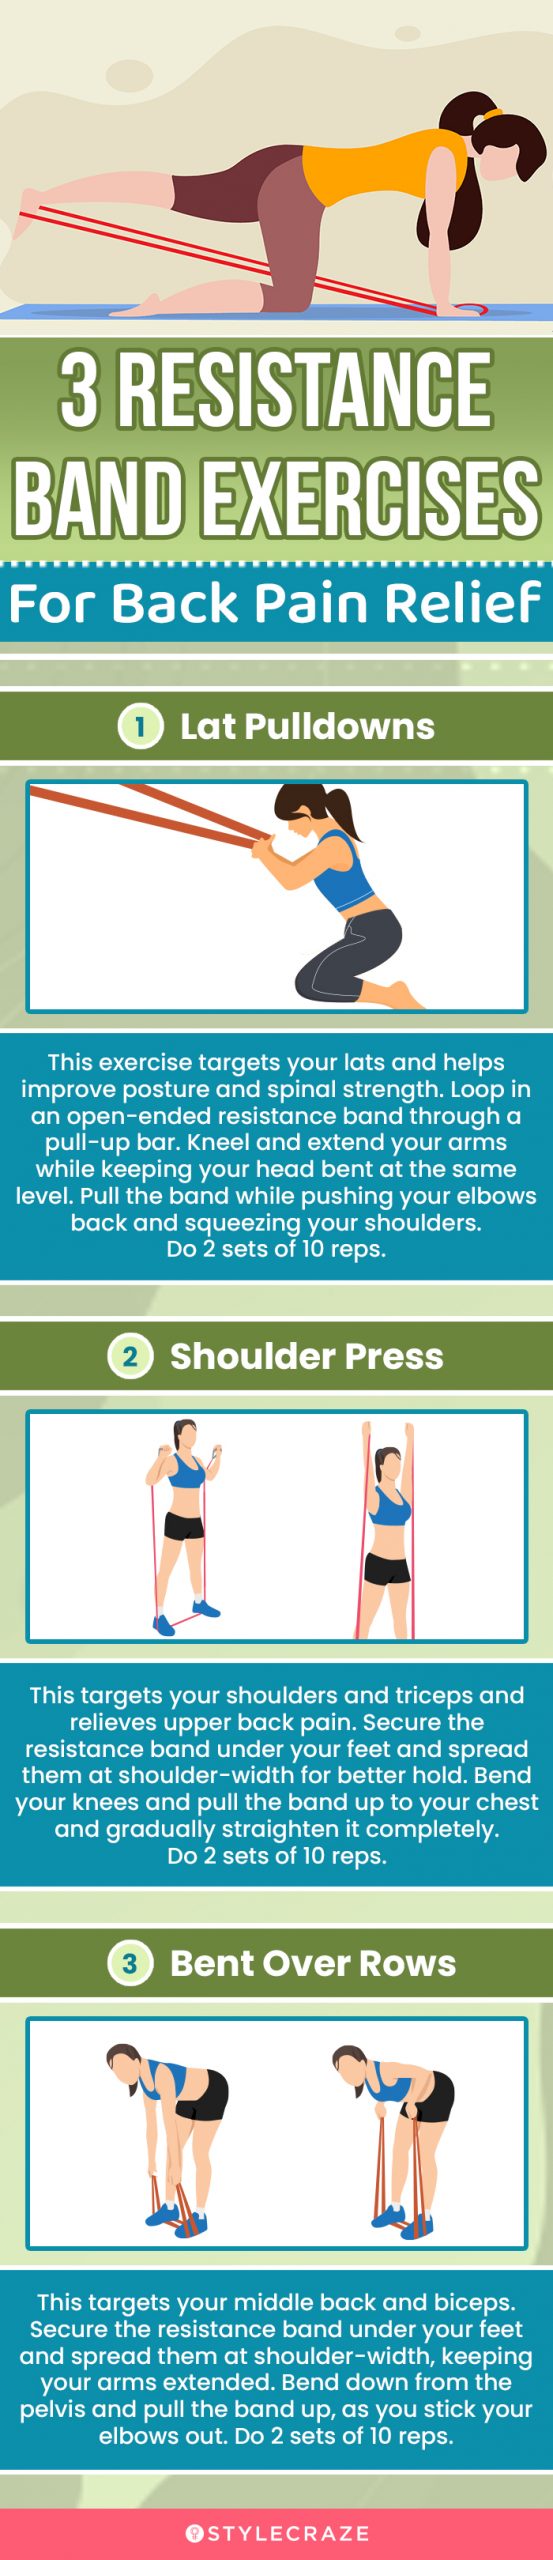 3 resistance band exercises for back pain relief (infographic)